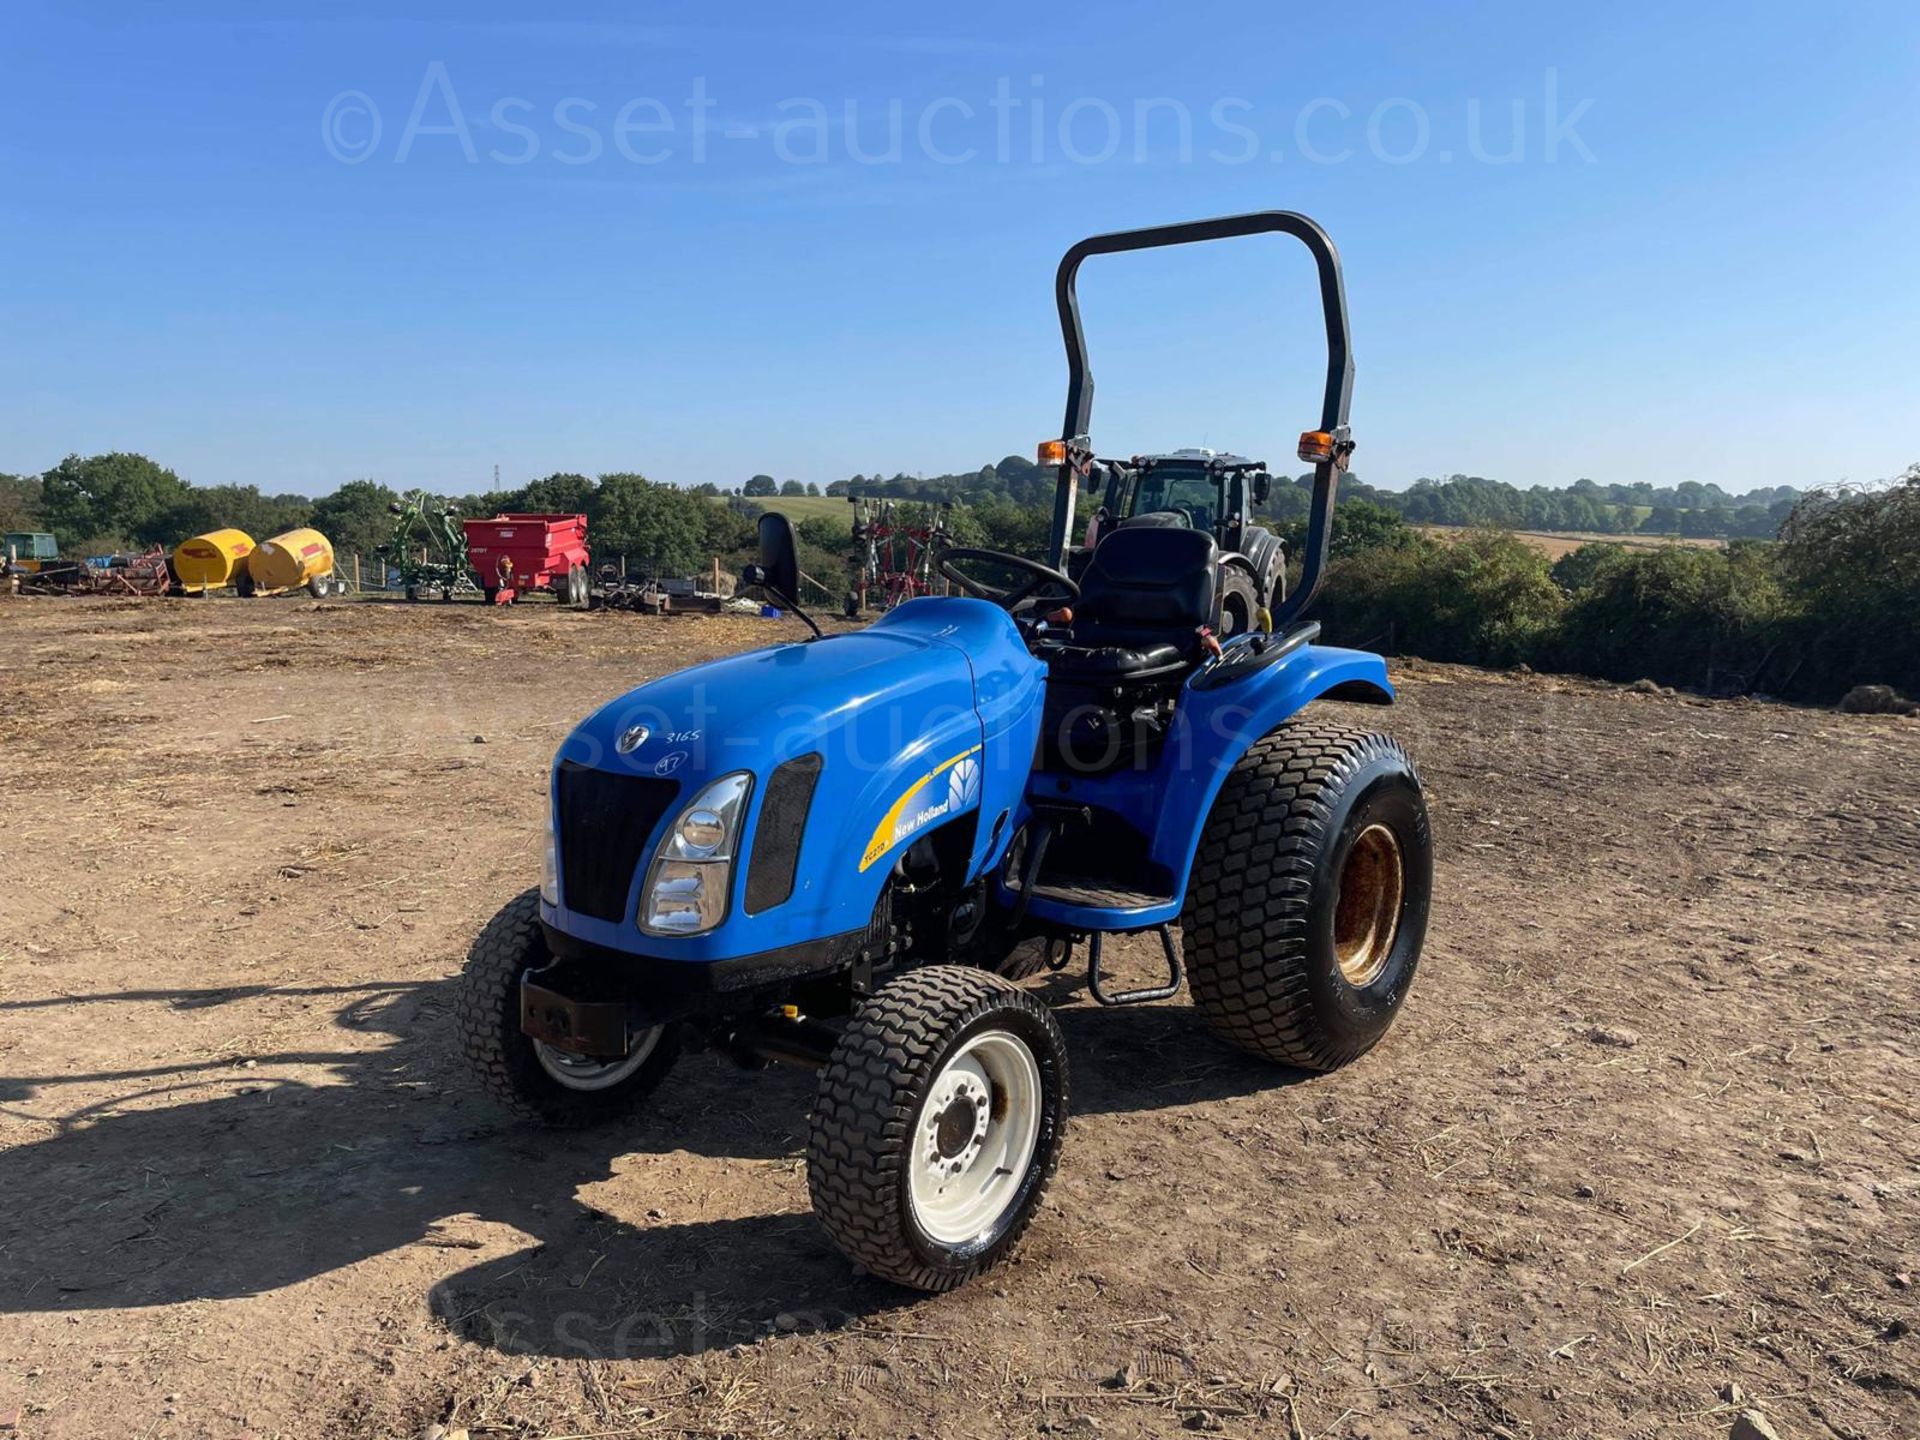 2005 NEW HOLLAND TC27DA 27hp 4WD COMPACT TRACTOR, RUNS DRIVES AND WORKS WELL, ROAD REGISTERED - Image 6 of 26